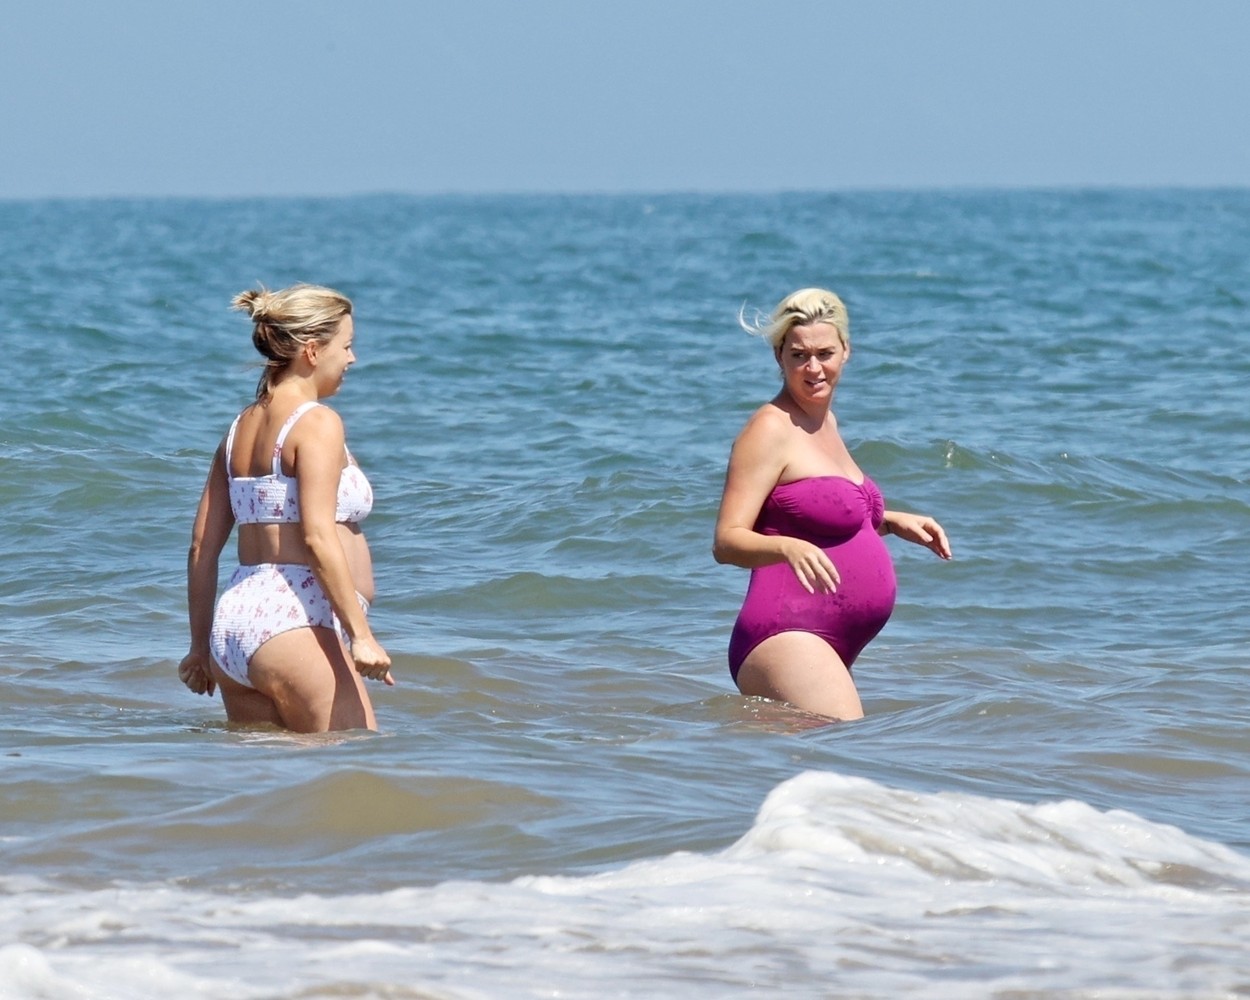 Malibu, CA  - *PREMIUM-EXCLUSIVE*  - *WEB EMBARGO UNTIL 9 AM PDT ON JULY 14, 2020* The Roar singer who’s expecting her first child in August, waded in to cool off in the ocean with her pregnant friend as temperatures soared in Southern California.

*UK Clients - Pictures Containing Children
Please Pixelate Face Prior To Publication*,Image: 542496434, License: Rights-managed, Restrictions: RIGHTS: WORLDWIDE EXCEPT IN UNITED KINGDOM, Model Release: no, Credit line: Clint Brewer Photography / BACKGRID / Backgrid USA / Profimedia